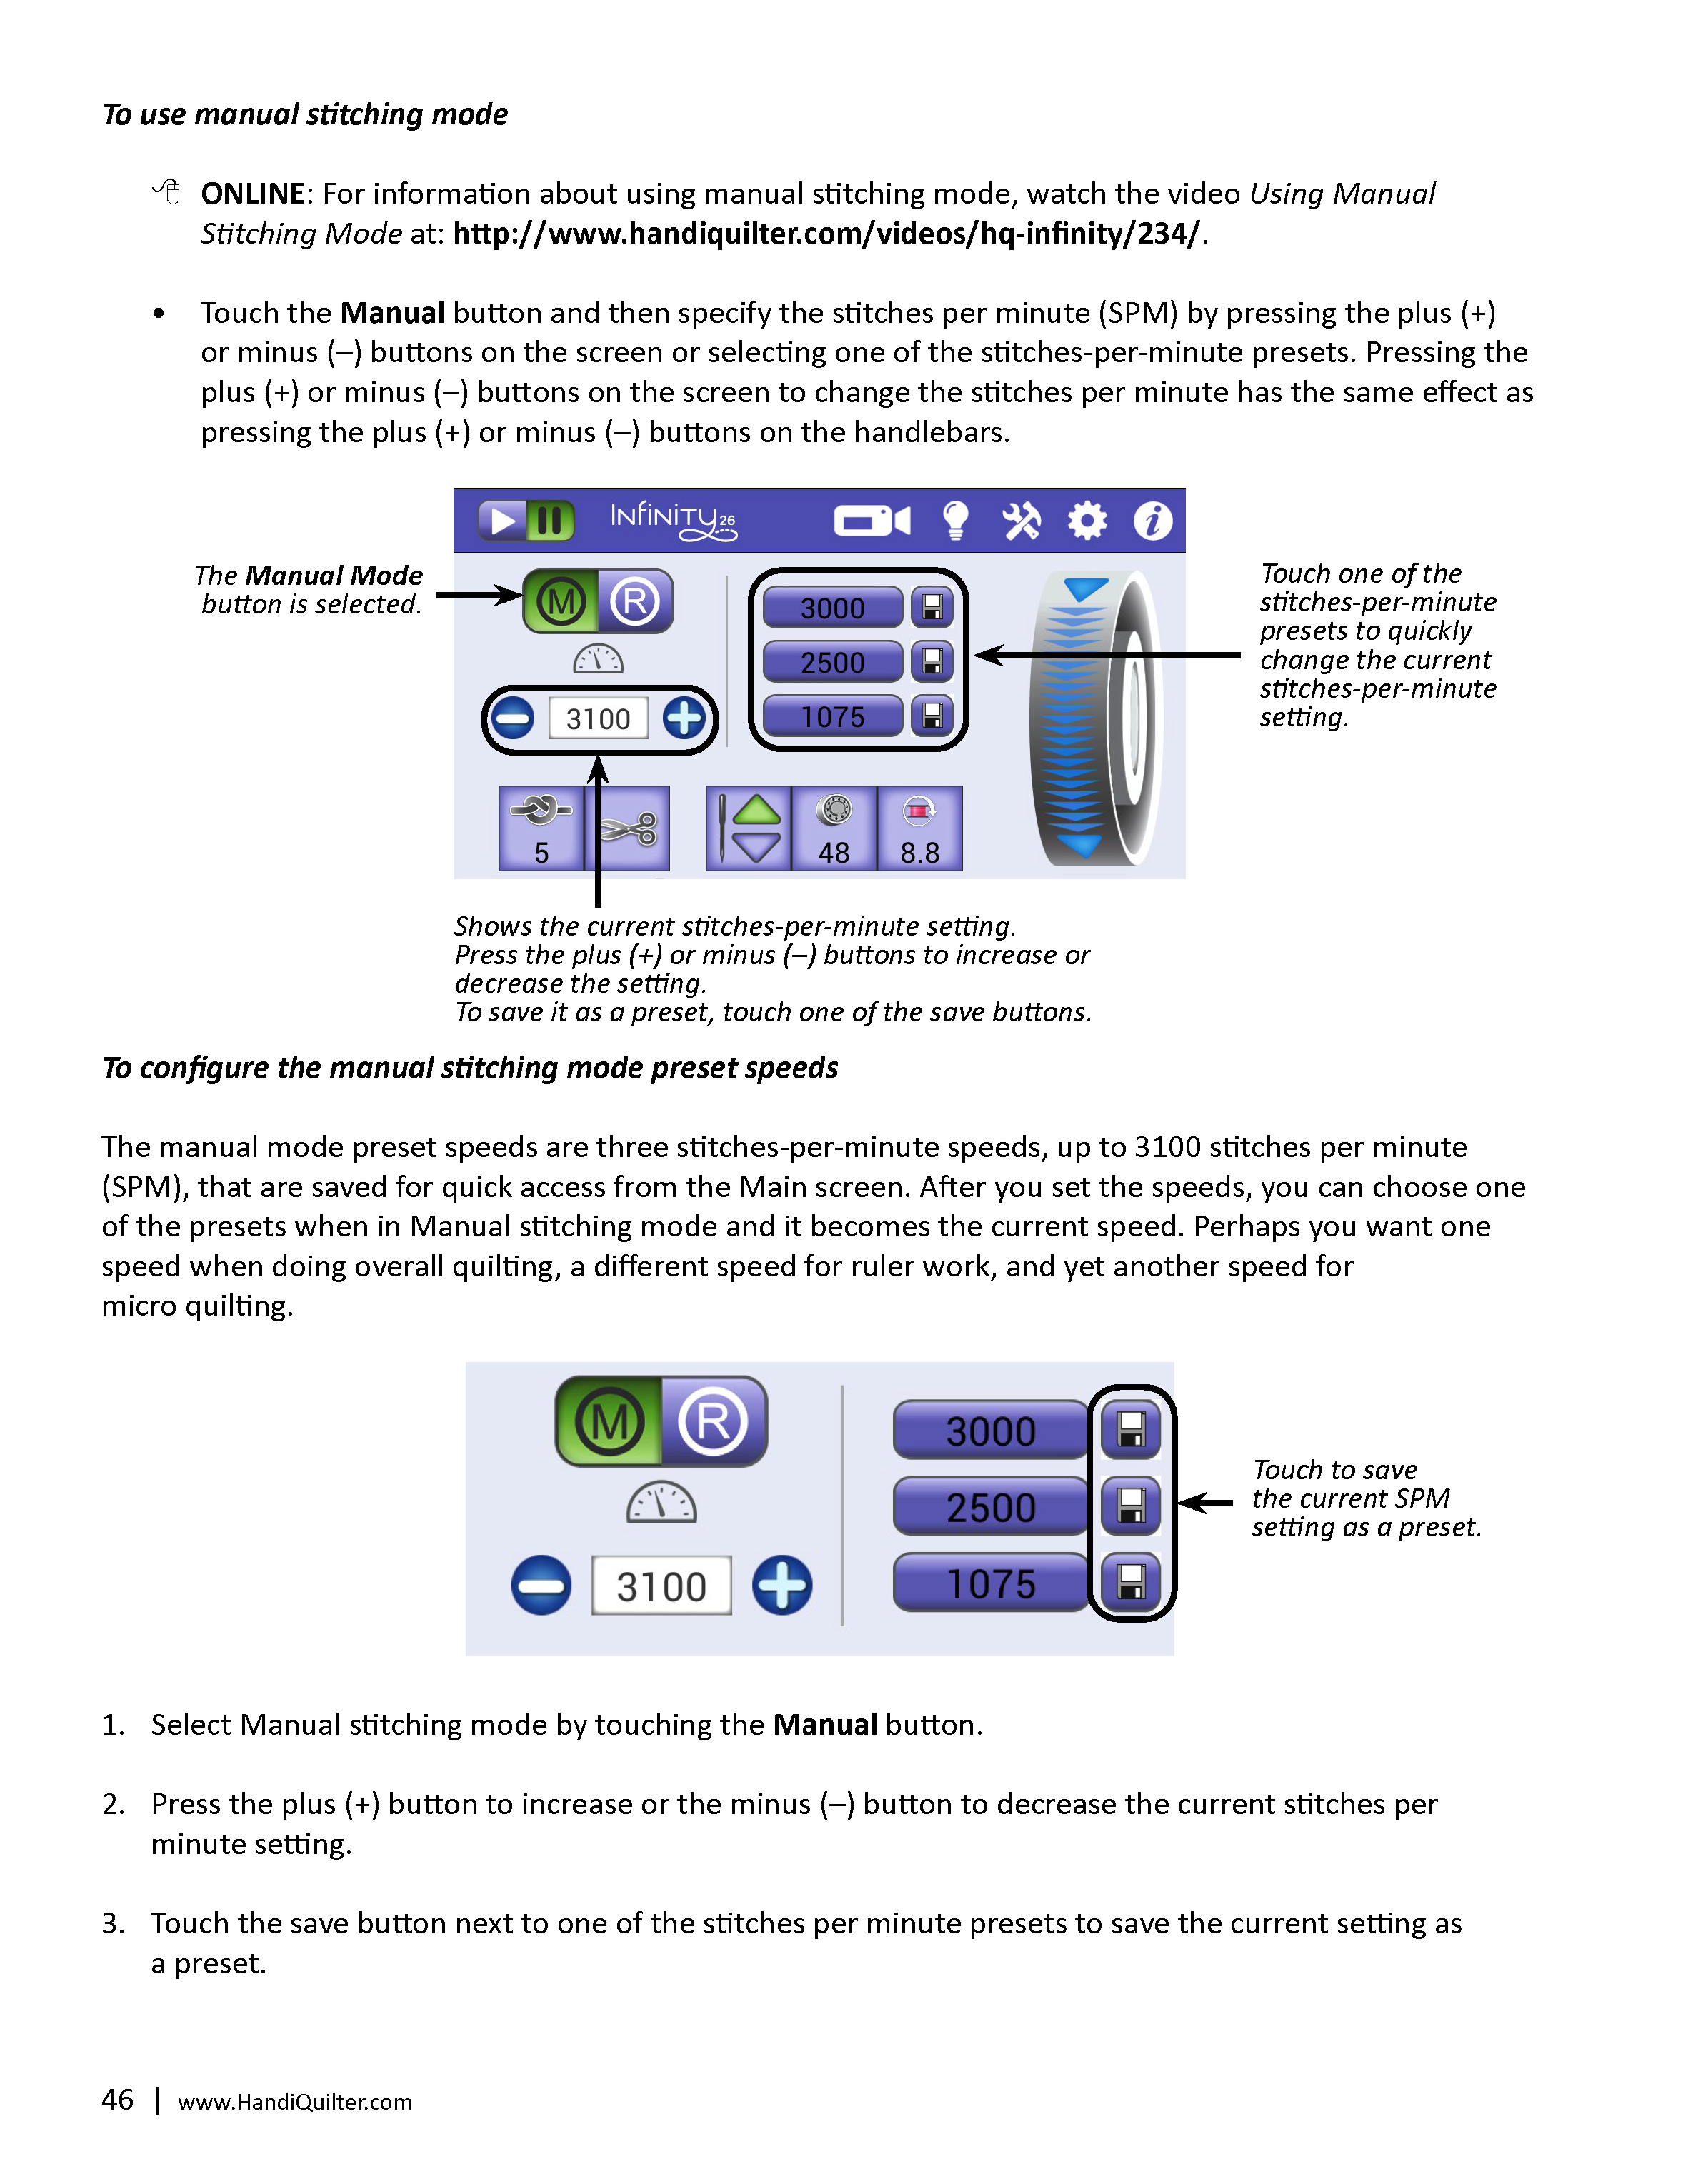 QM33001-HQ-Infinity-User-manual-version-1.4-ALL-Web-1_Page_47.png